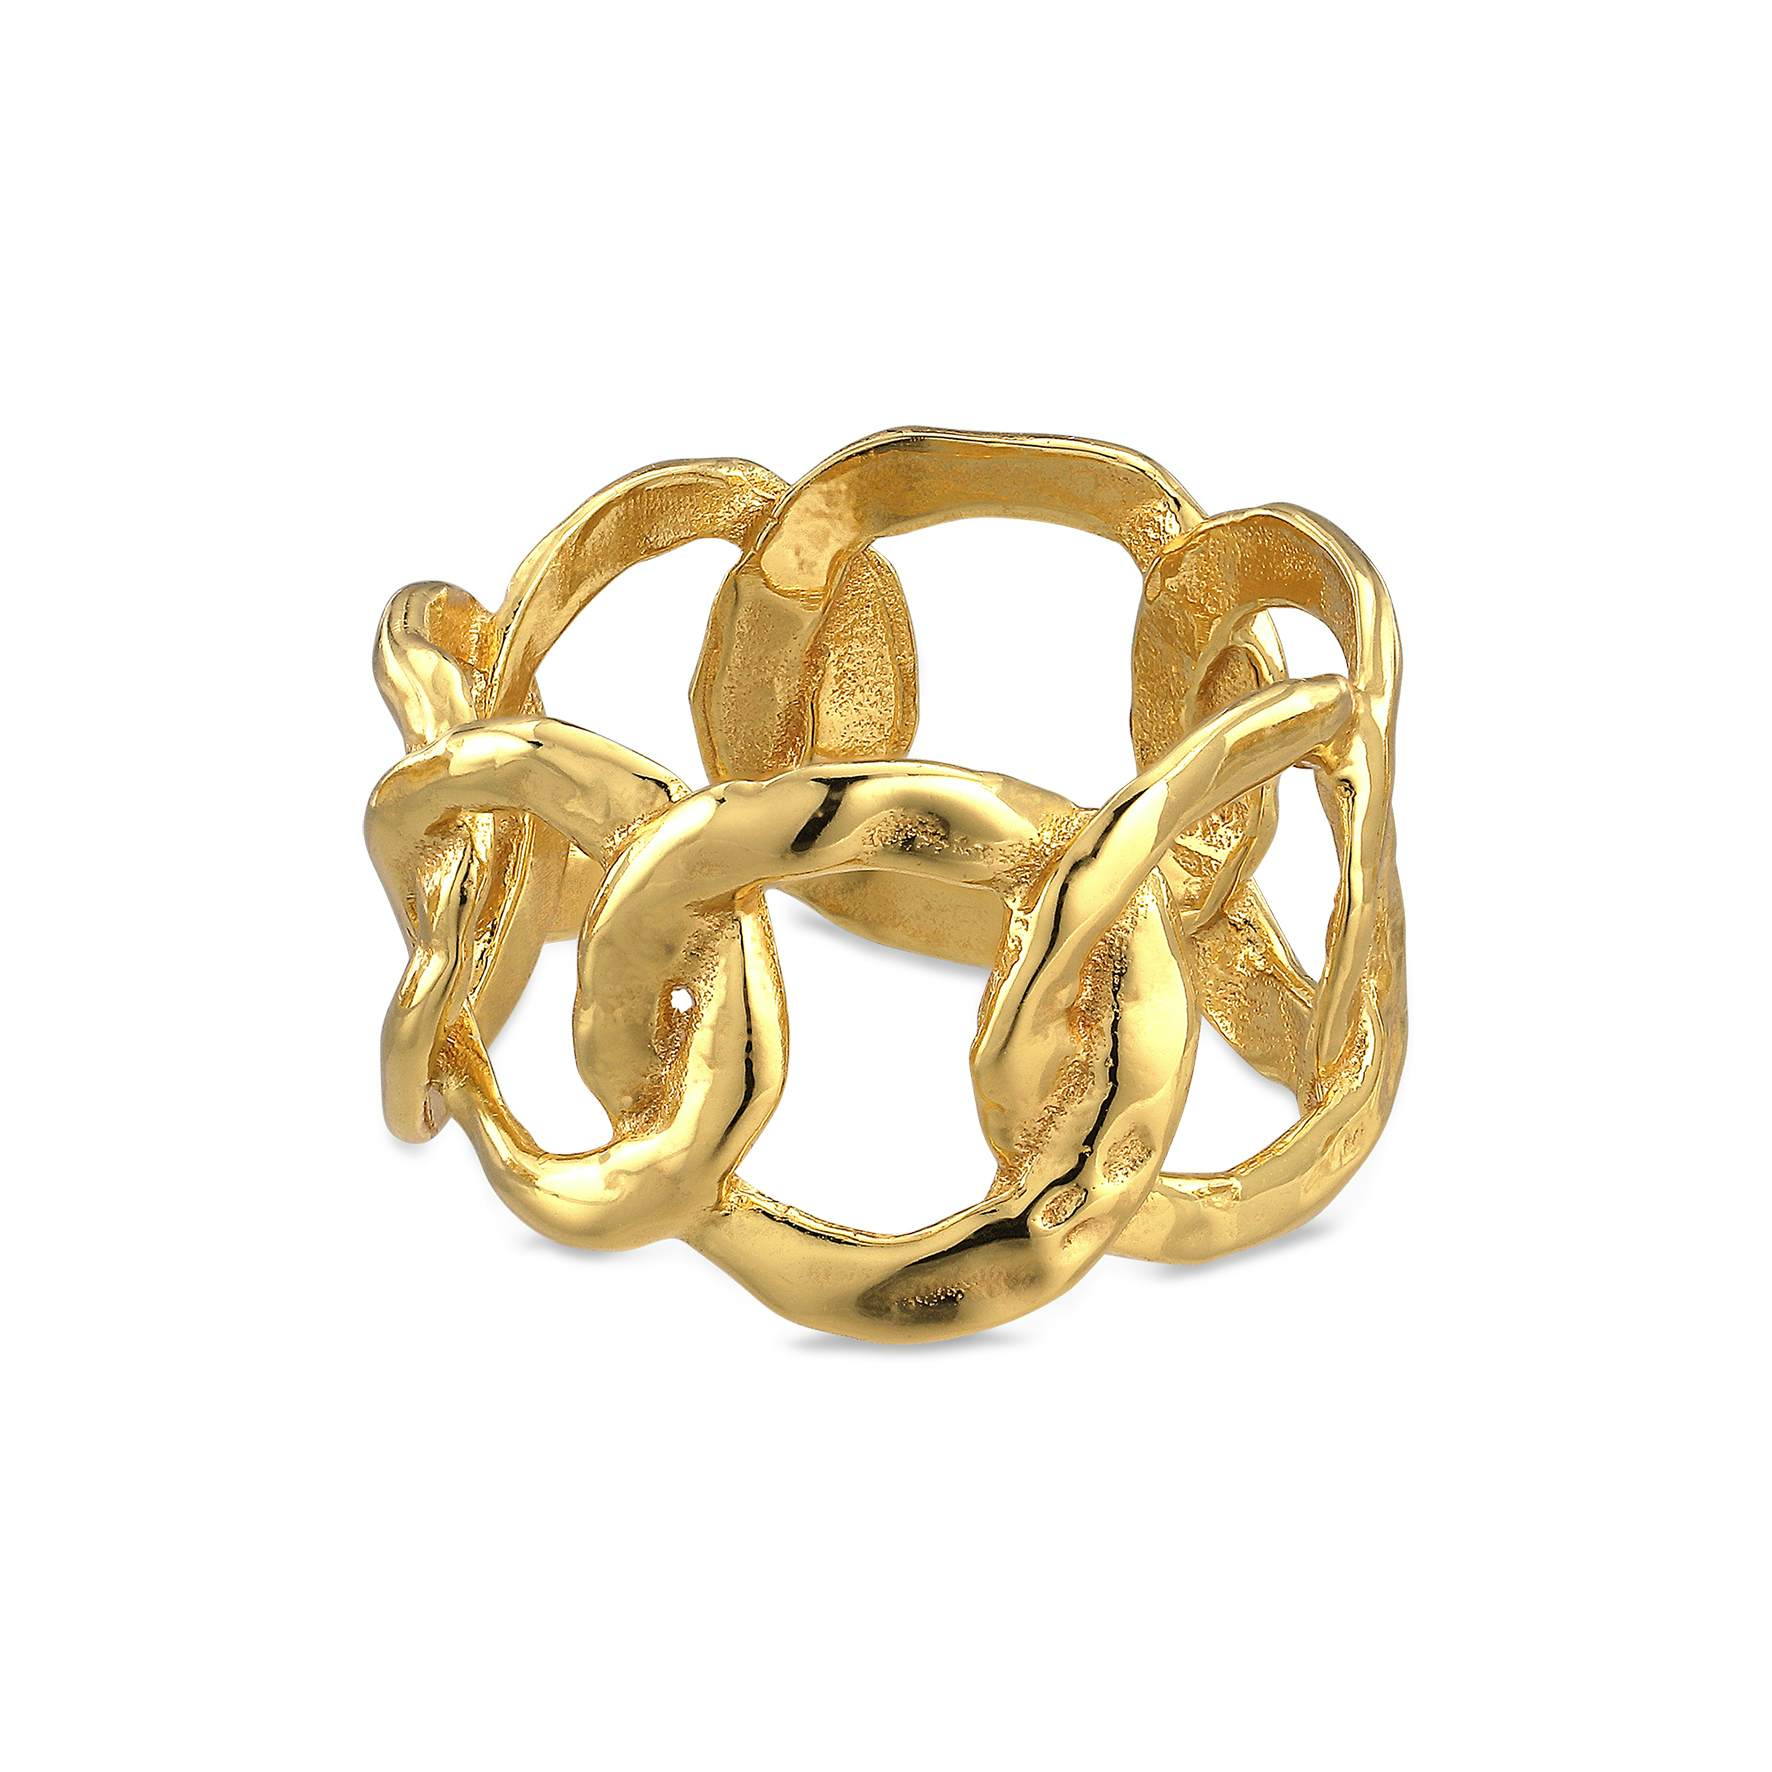 Big Space Link Ring from Jane Kønig in Goldplated-Silver Sterling 925